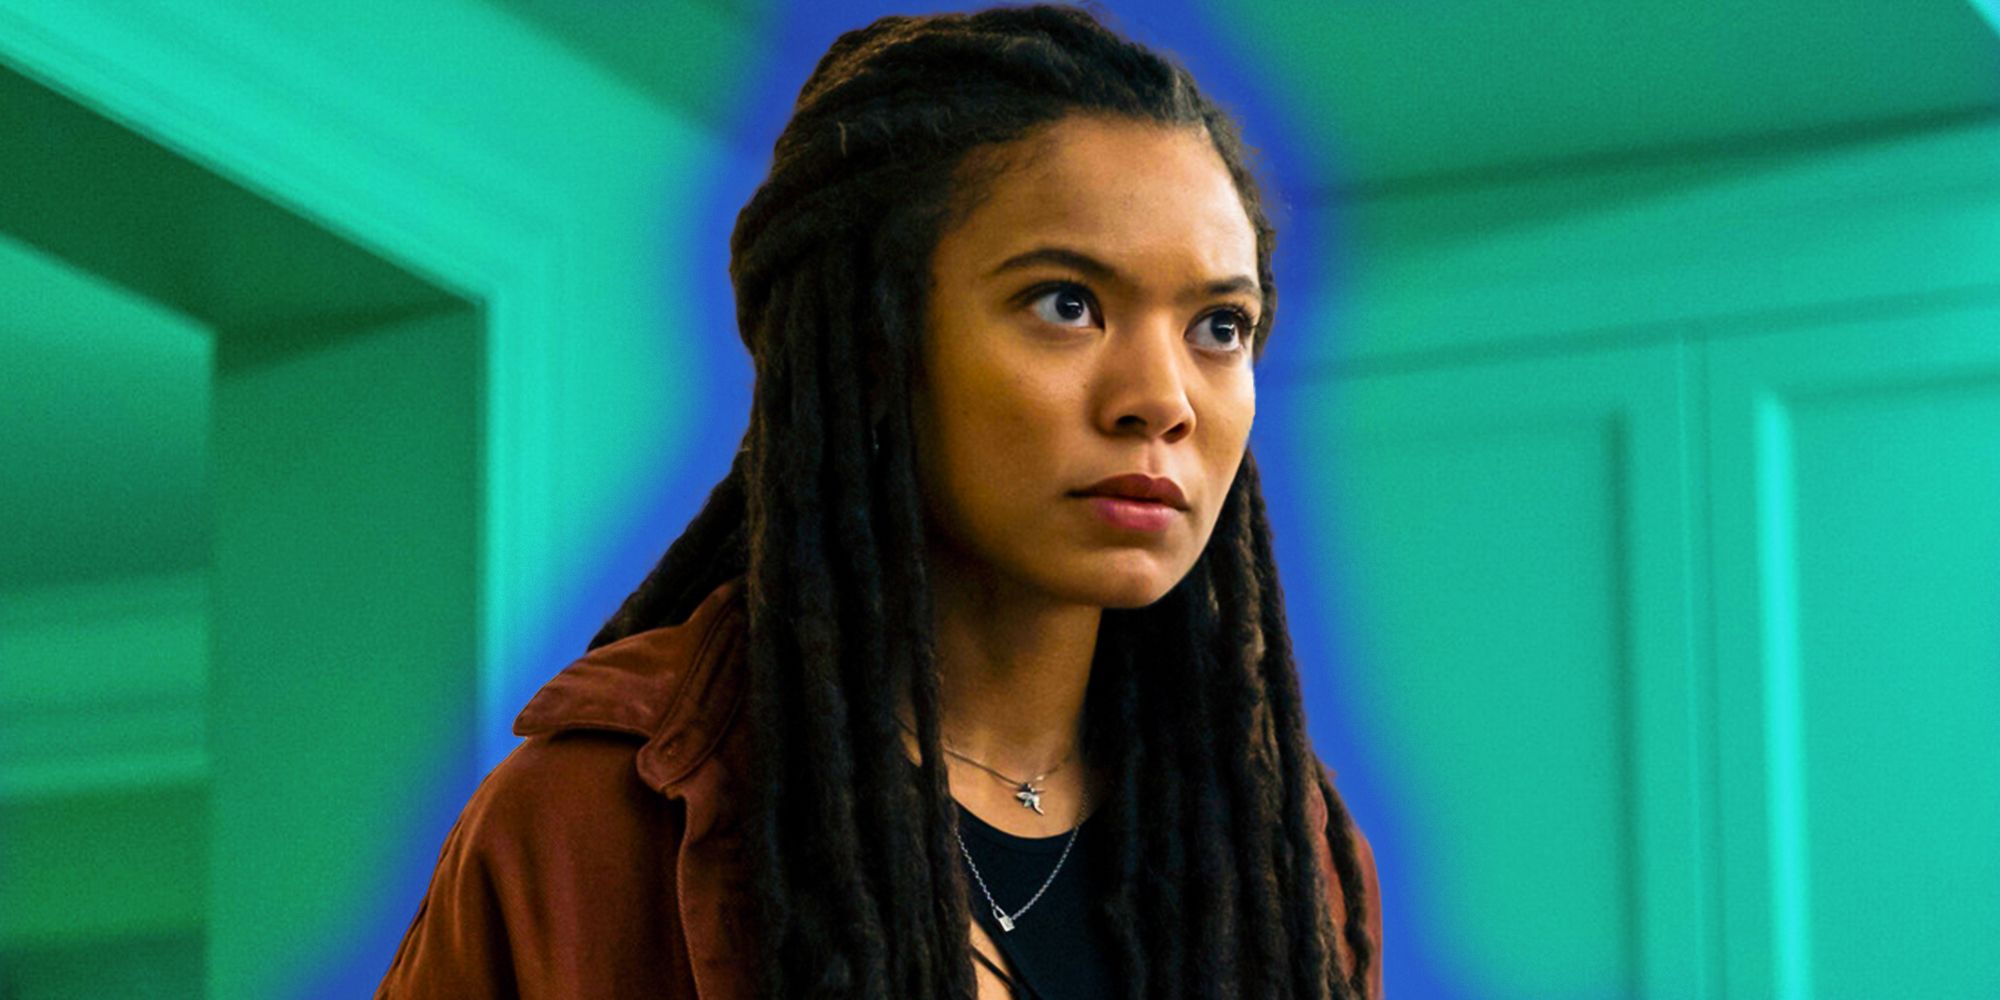 Jaz Sinclair as Marie Moreau with a green background in Gen V season 1 looking to the right